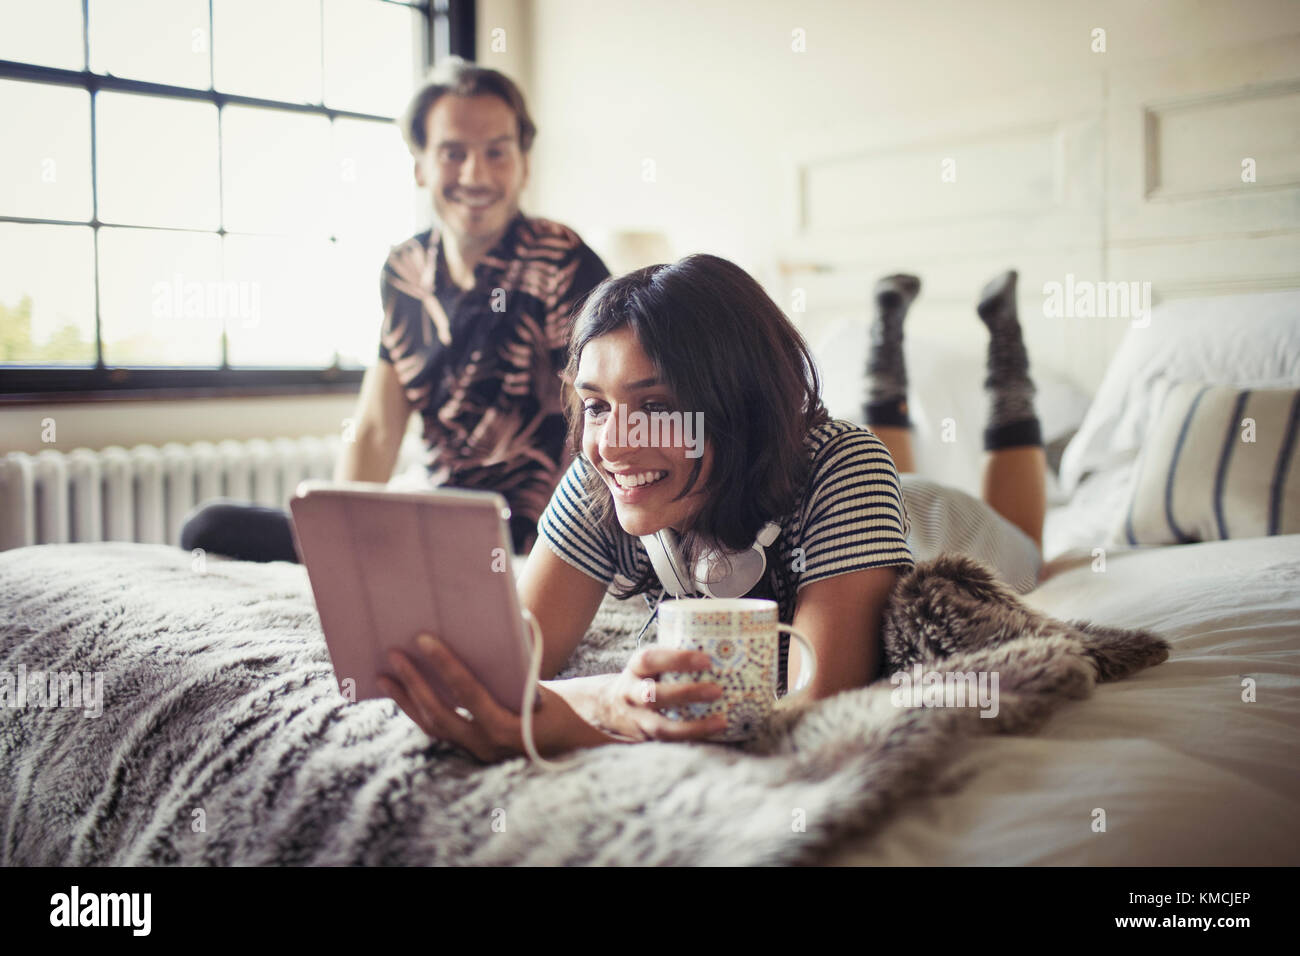 Smiling couple relaxing, drinking coffee and using digital tablet on bed Stock Photo